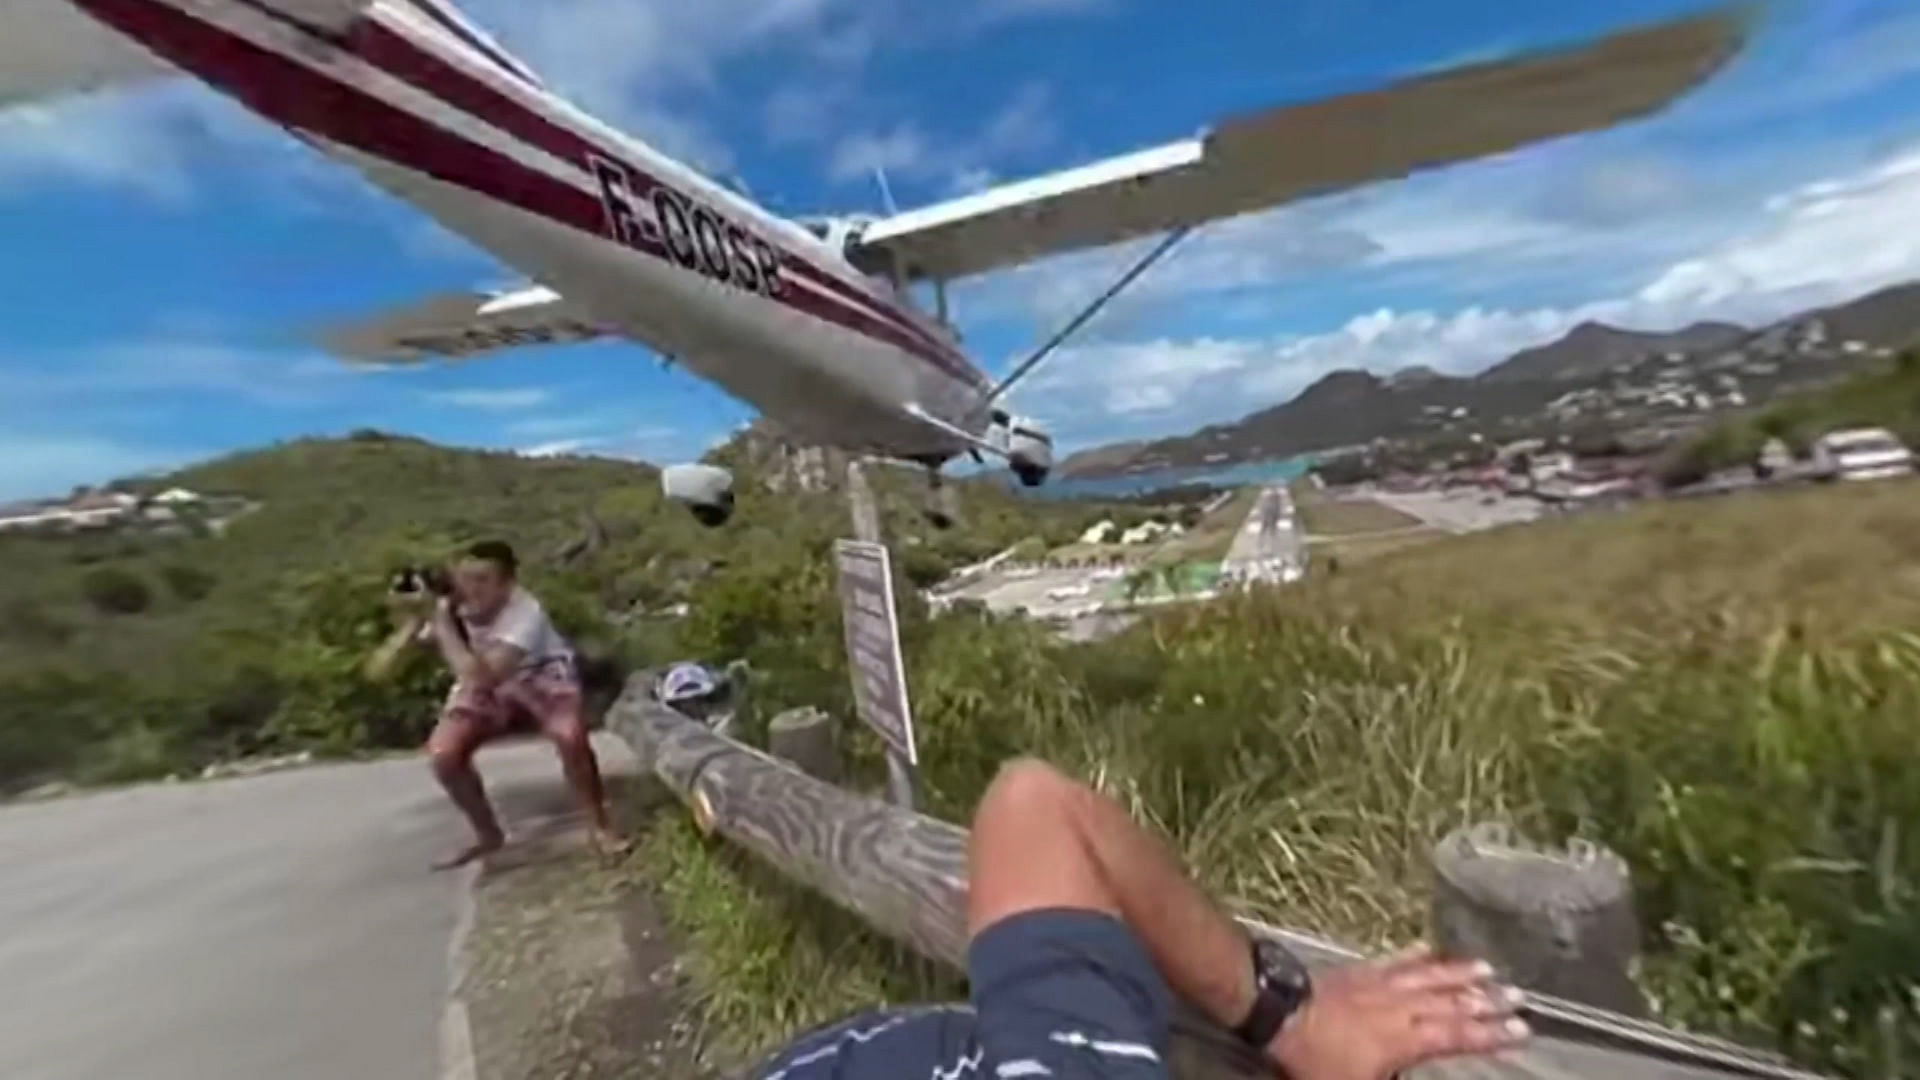 This lucky tourist had a narrow escape when a plane skimmed the top of his head while taking a photo in St Barts. (Photo: AP/Caters News screengrab)